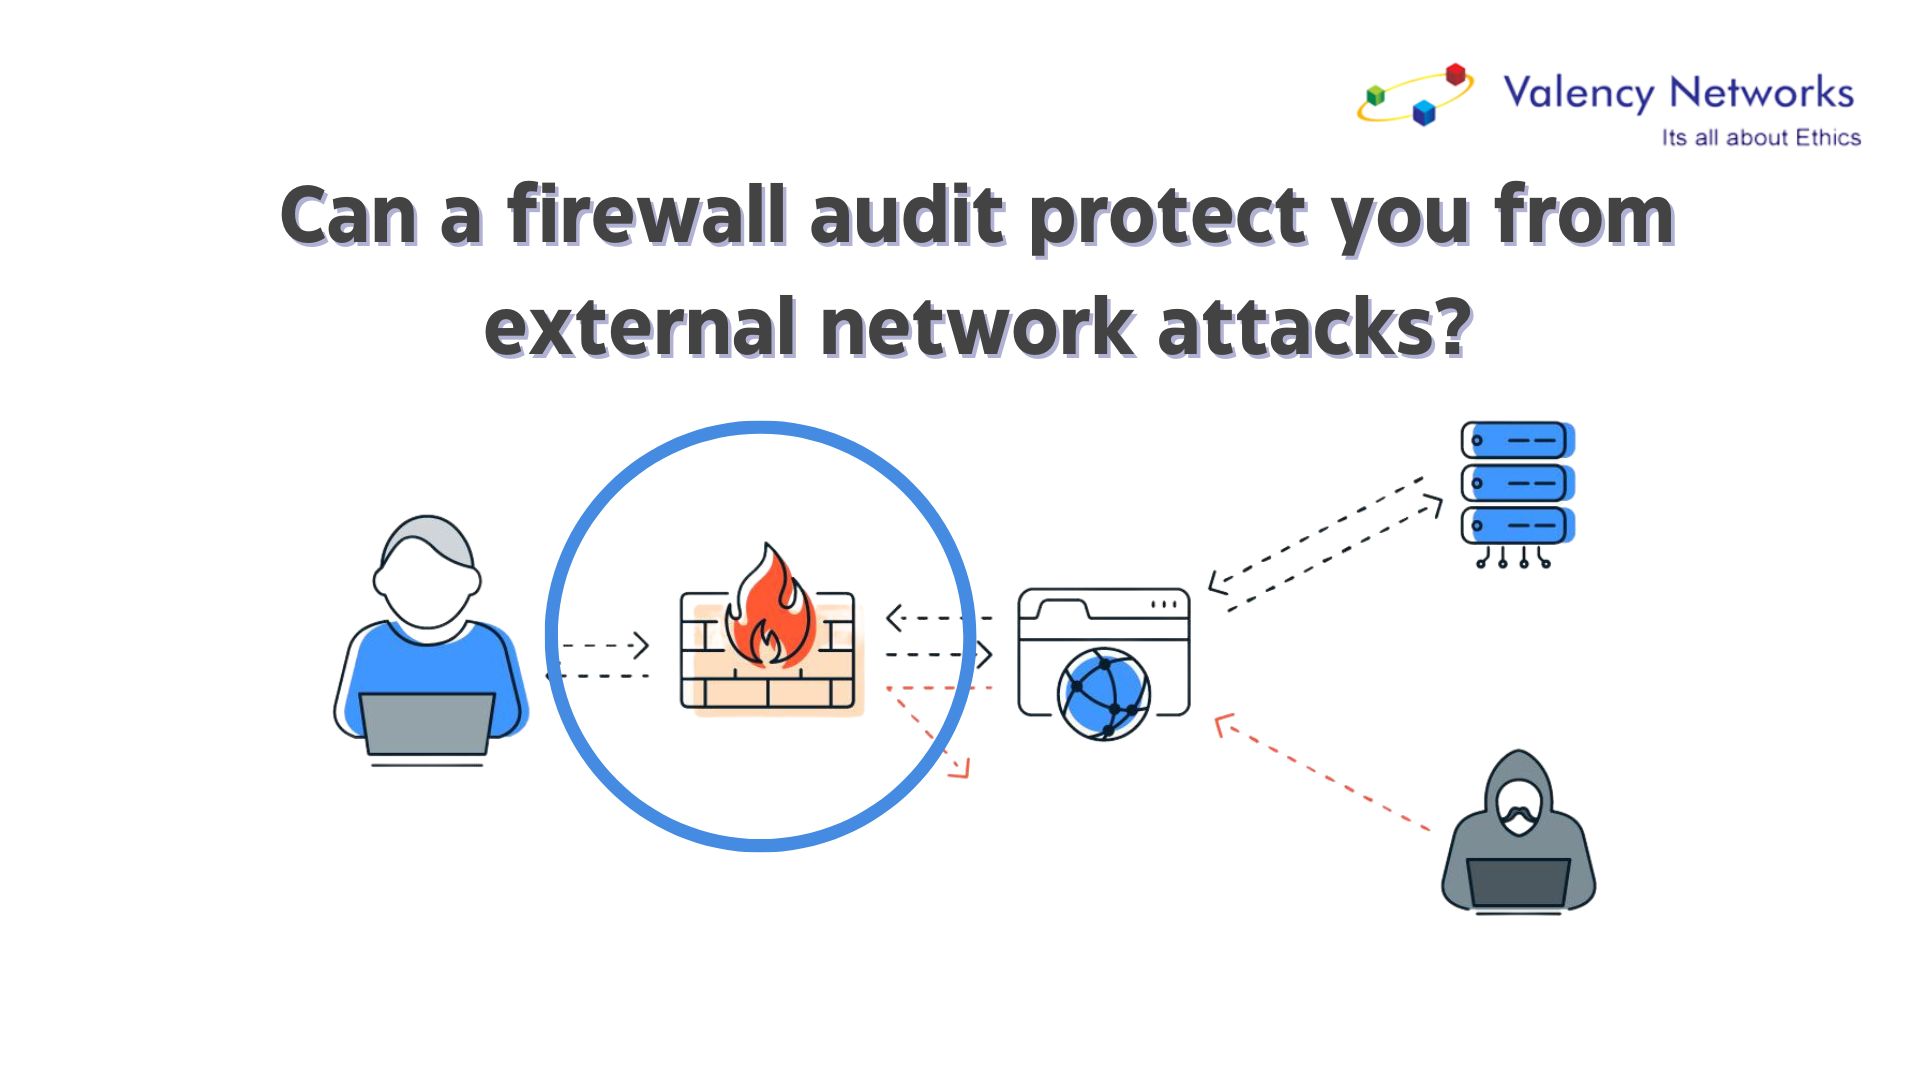 Can a firewall audit protect you from external network attacks?